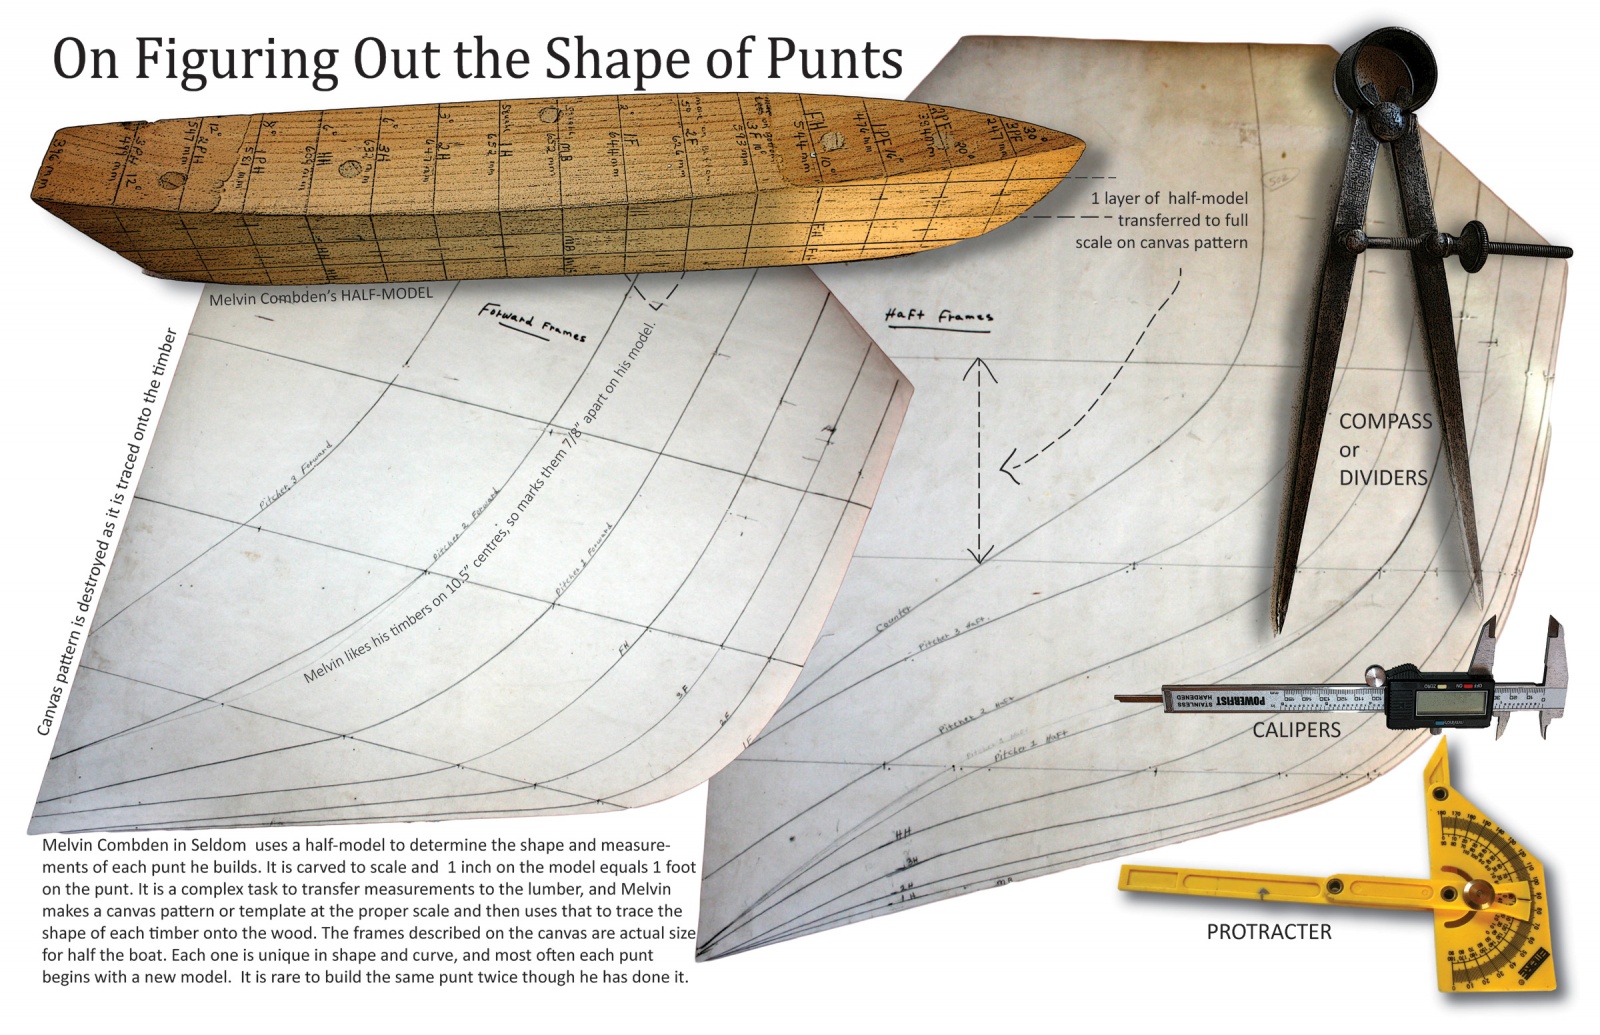 On Figuring Out the Shape of Punts